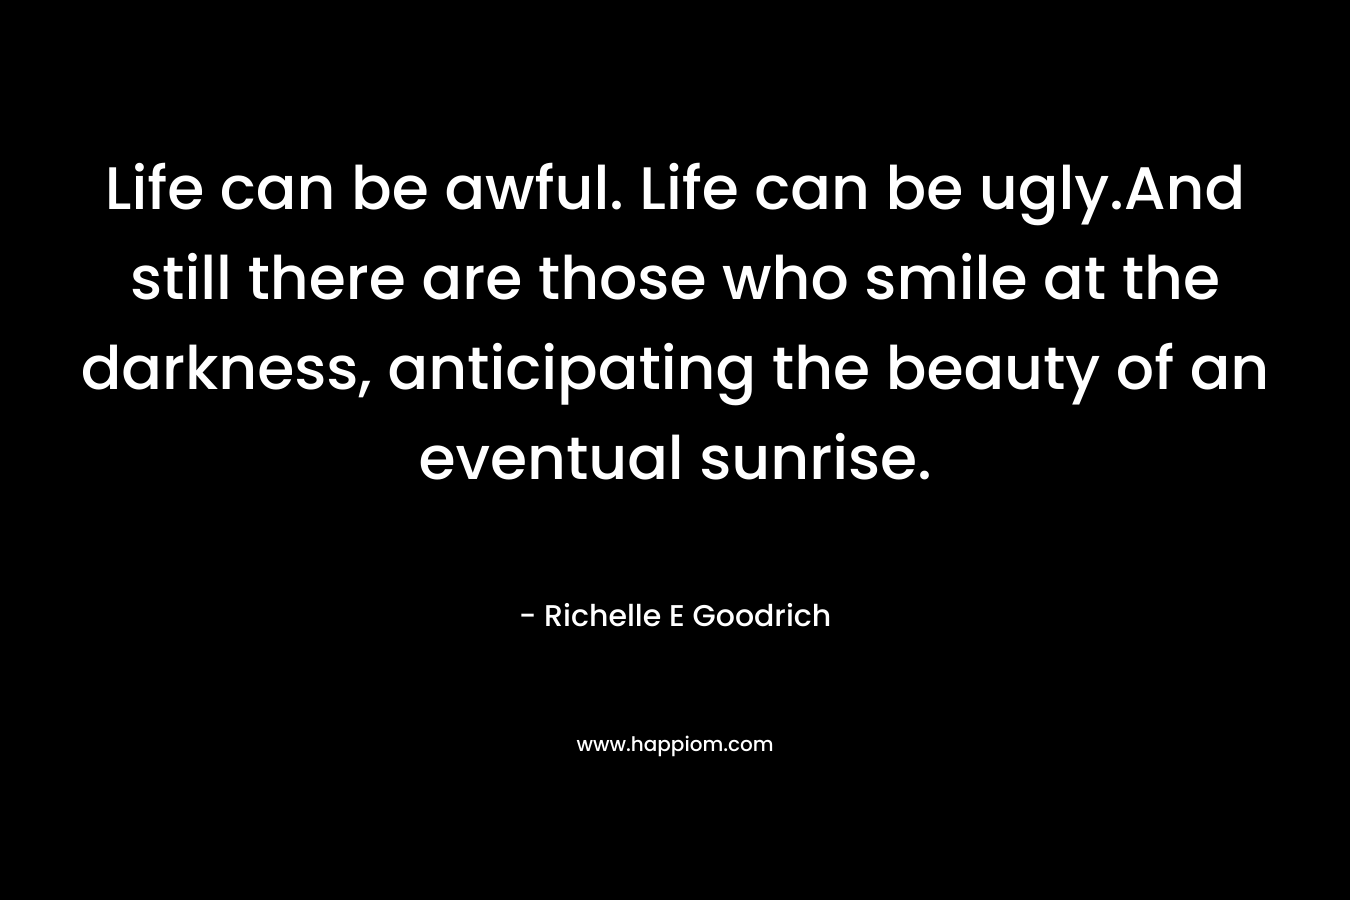 Life can be awful. Life can be ugly.And still there are those who smile at the darkness, anticipating the beauty of an eventual sunrise.